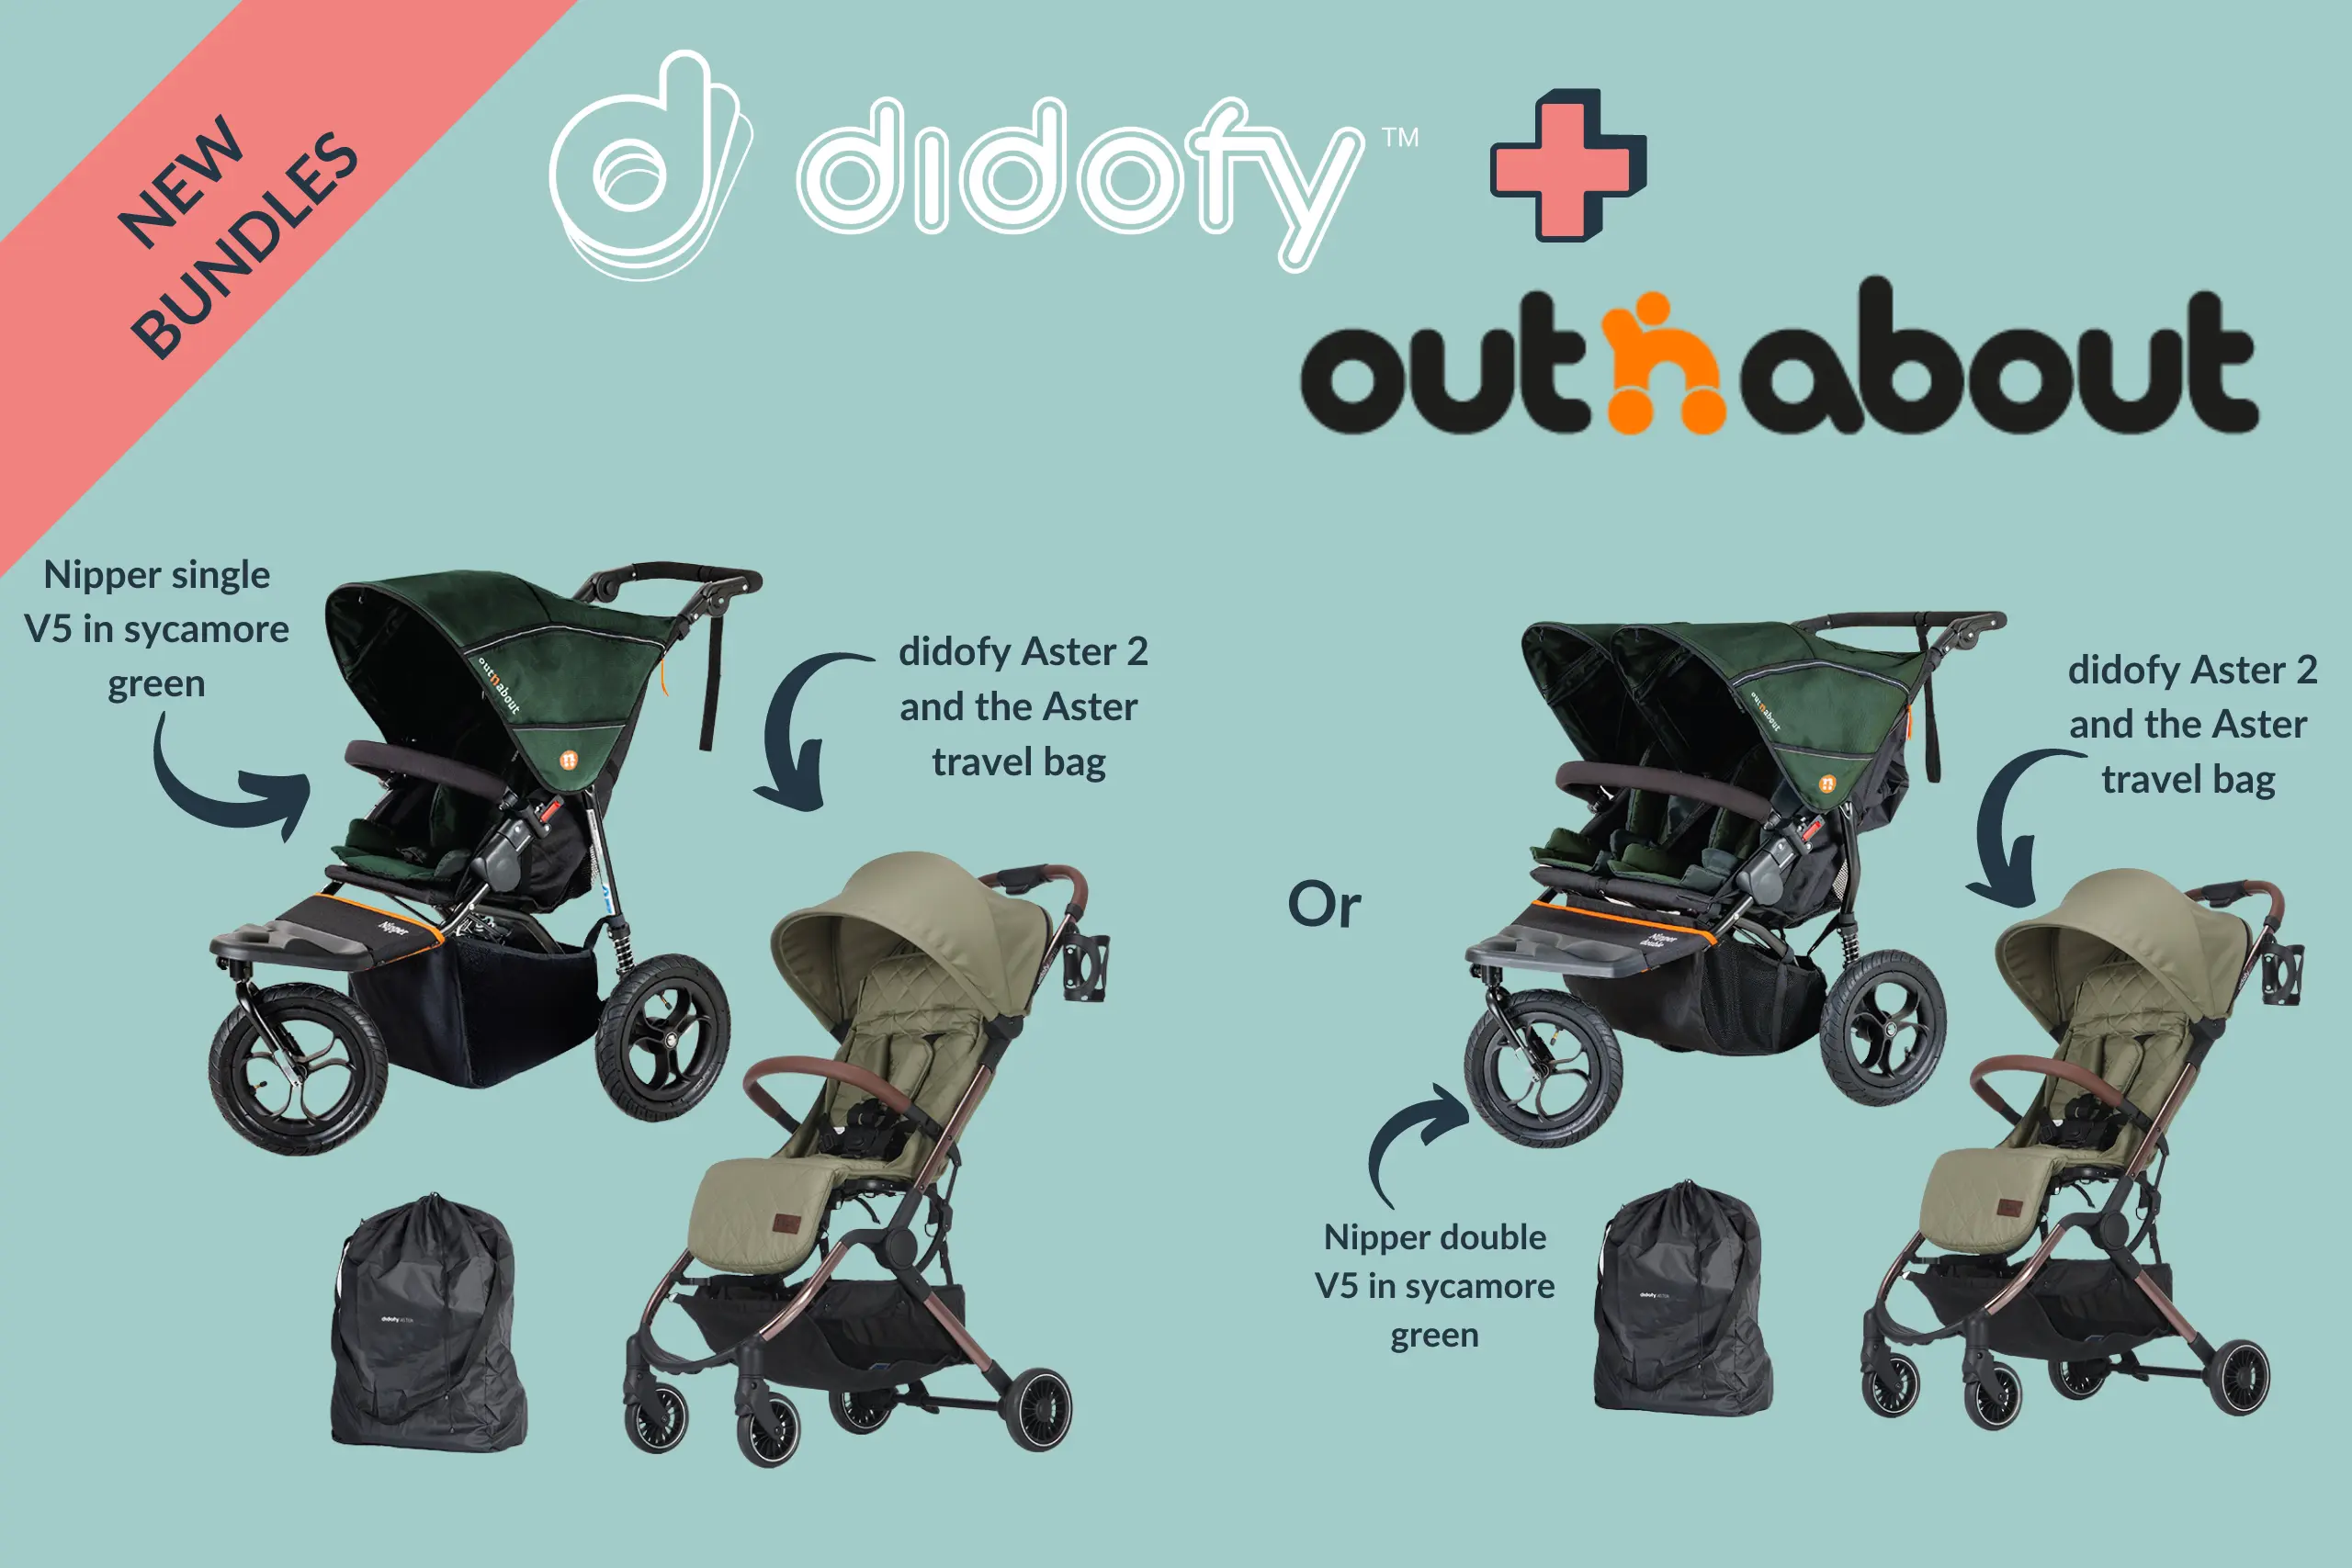 Didofy and out'n'about bundle